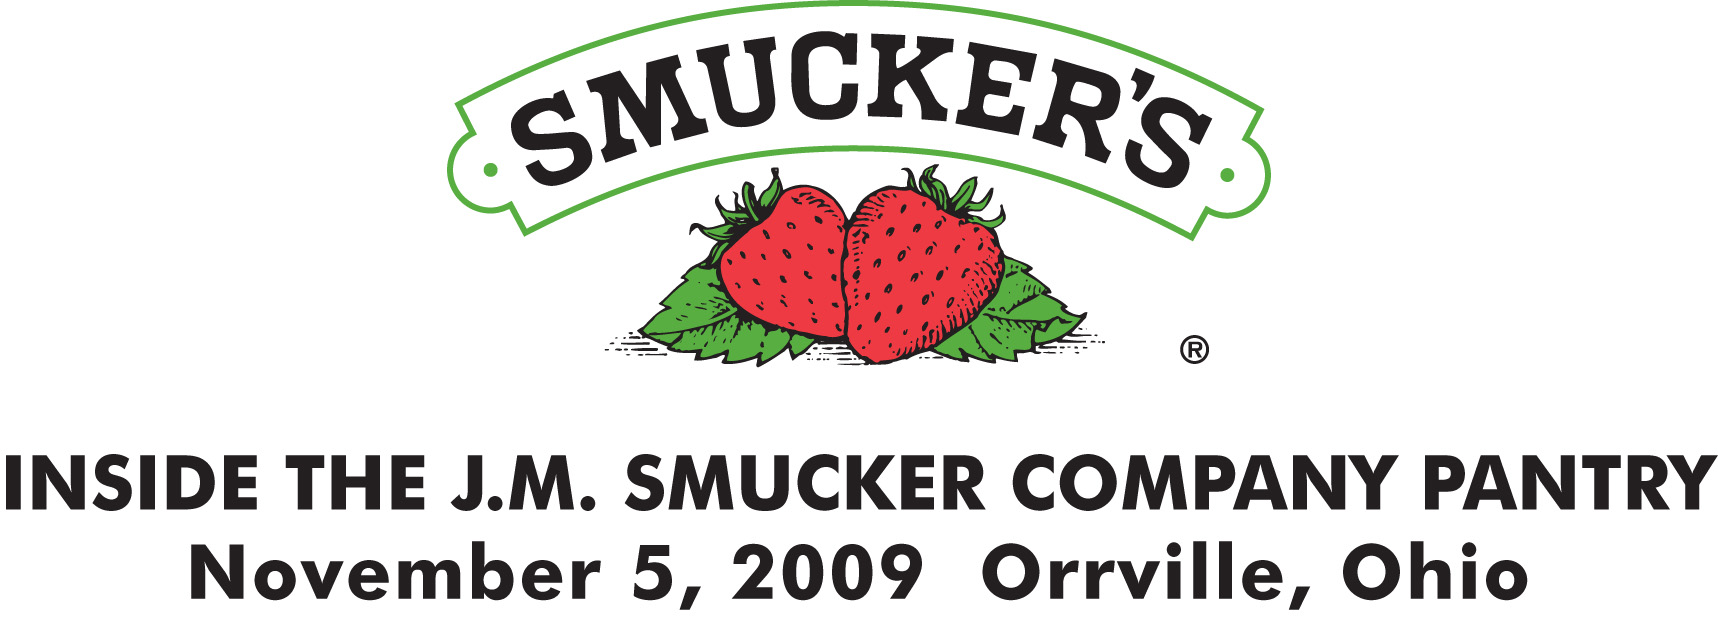 Smuckers Logos.